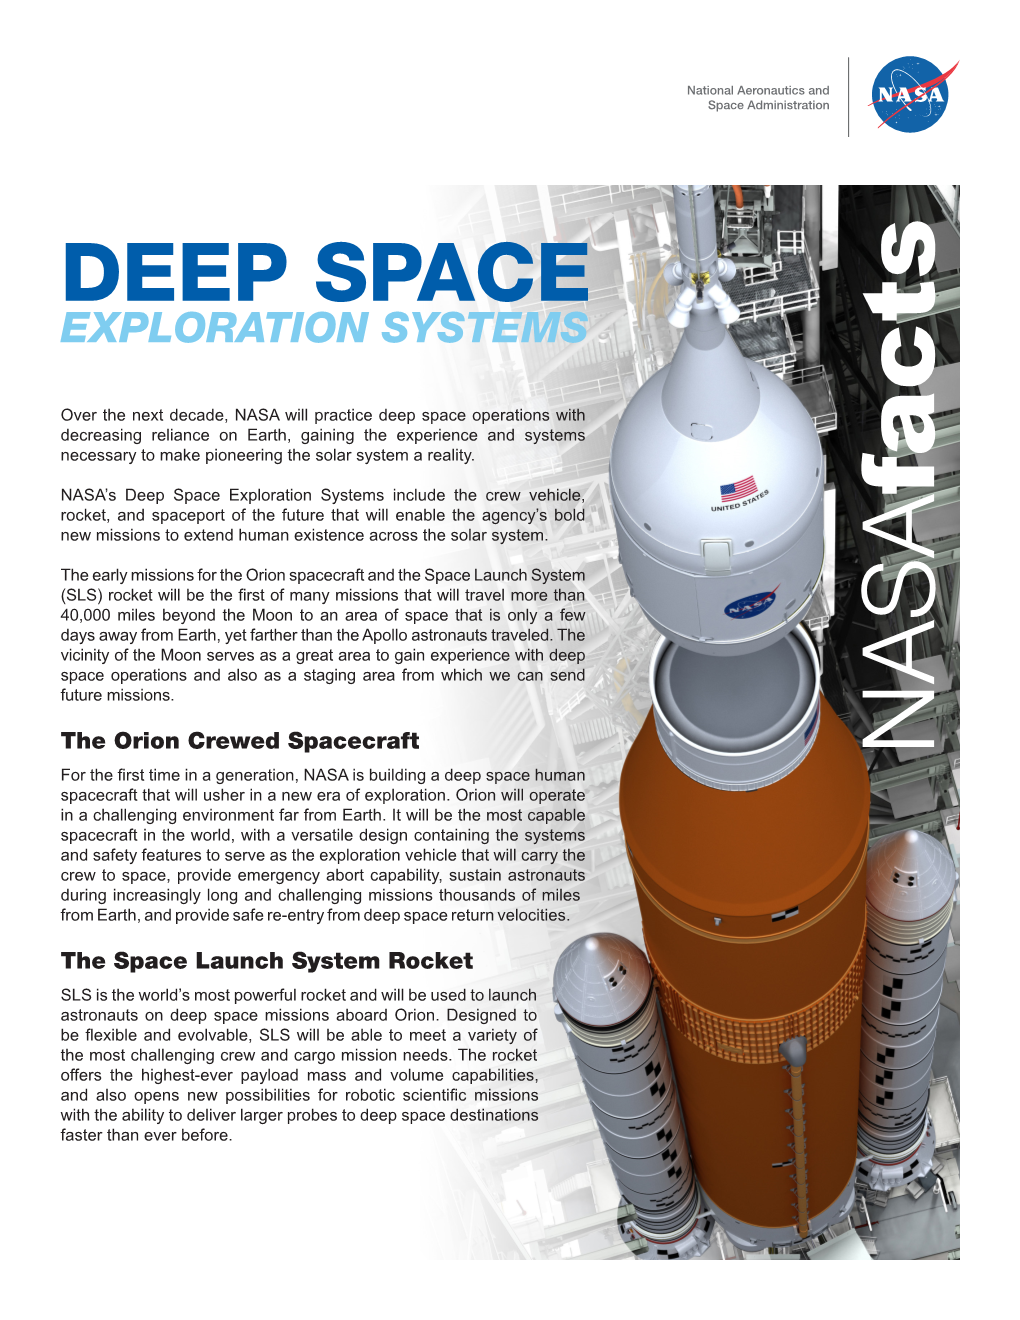 Deep Space: Exploration Systems